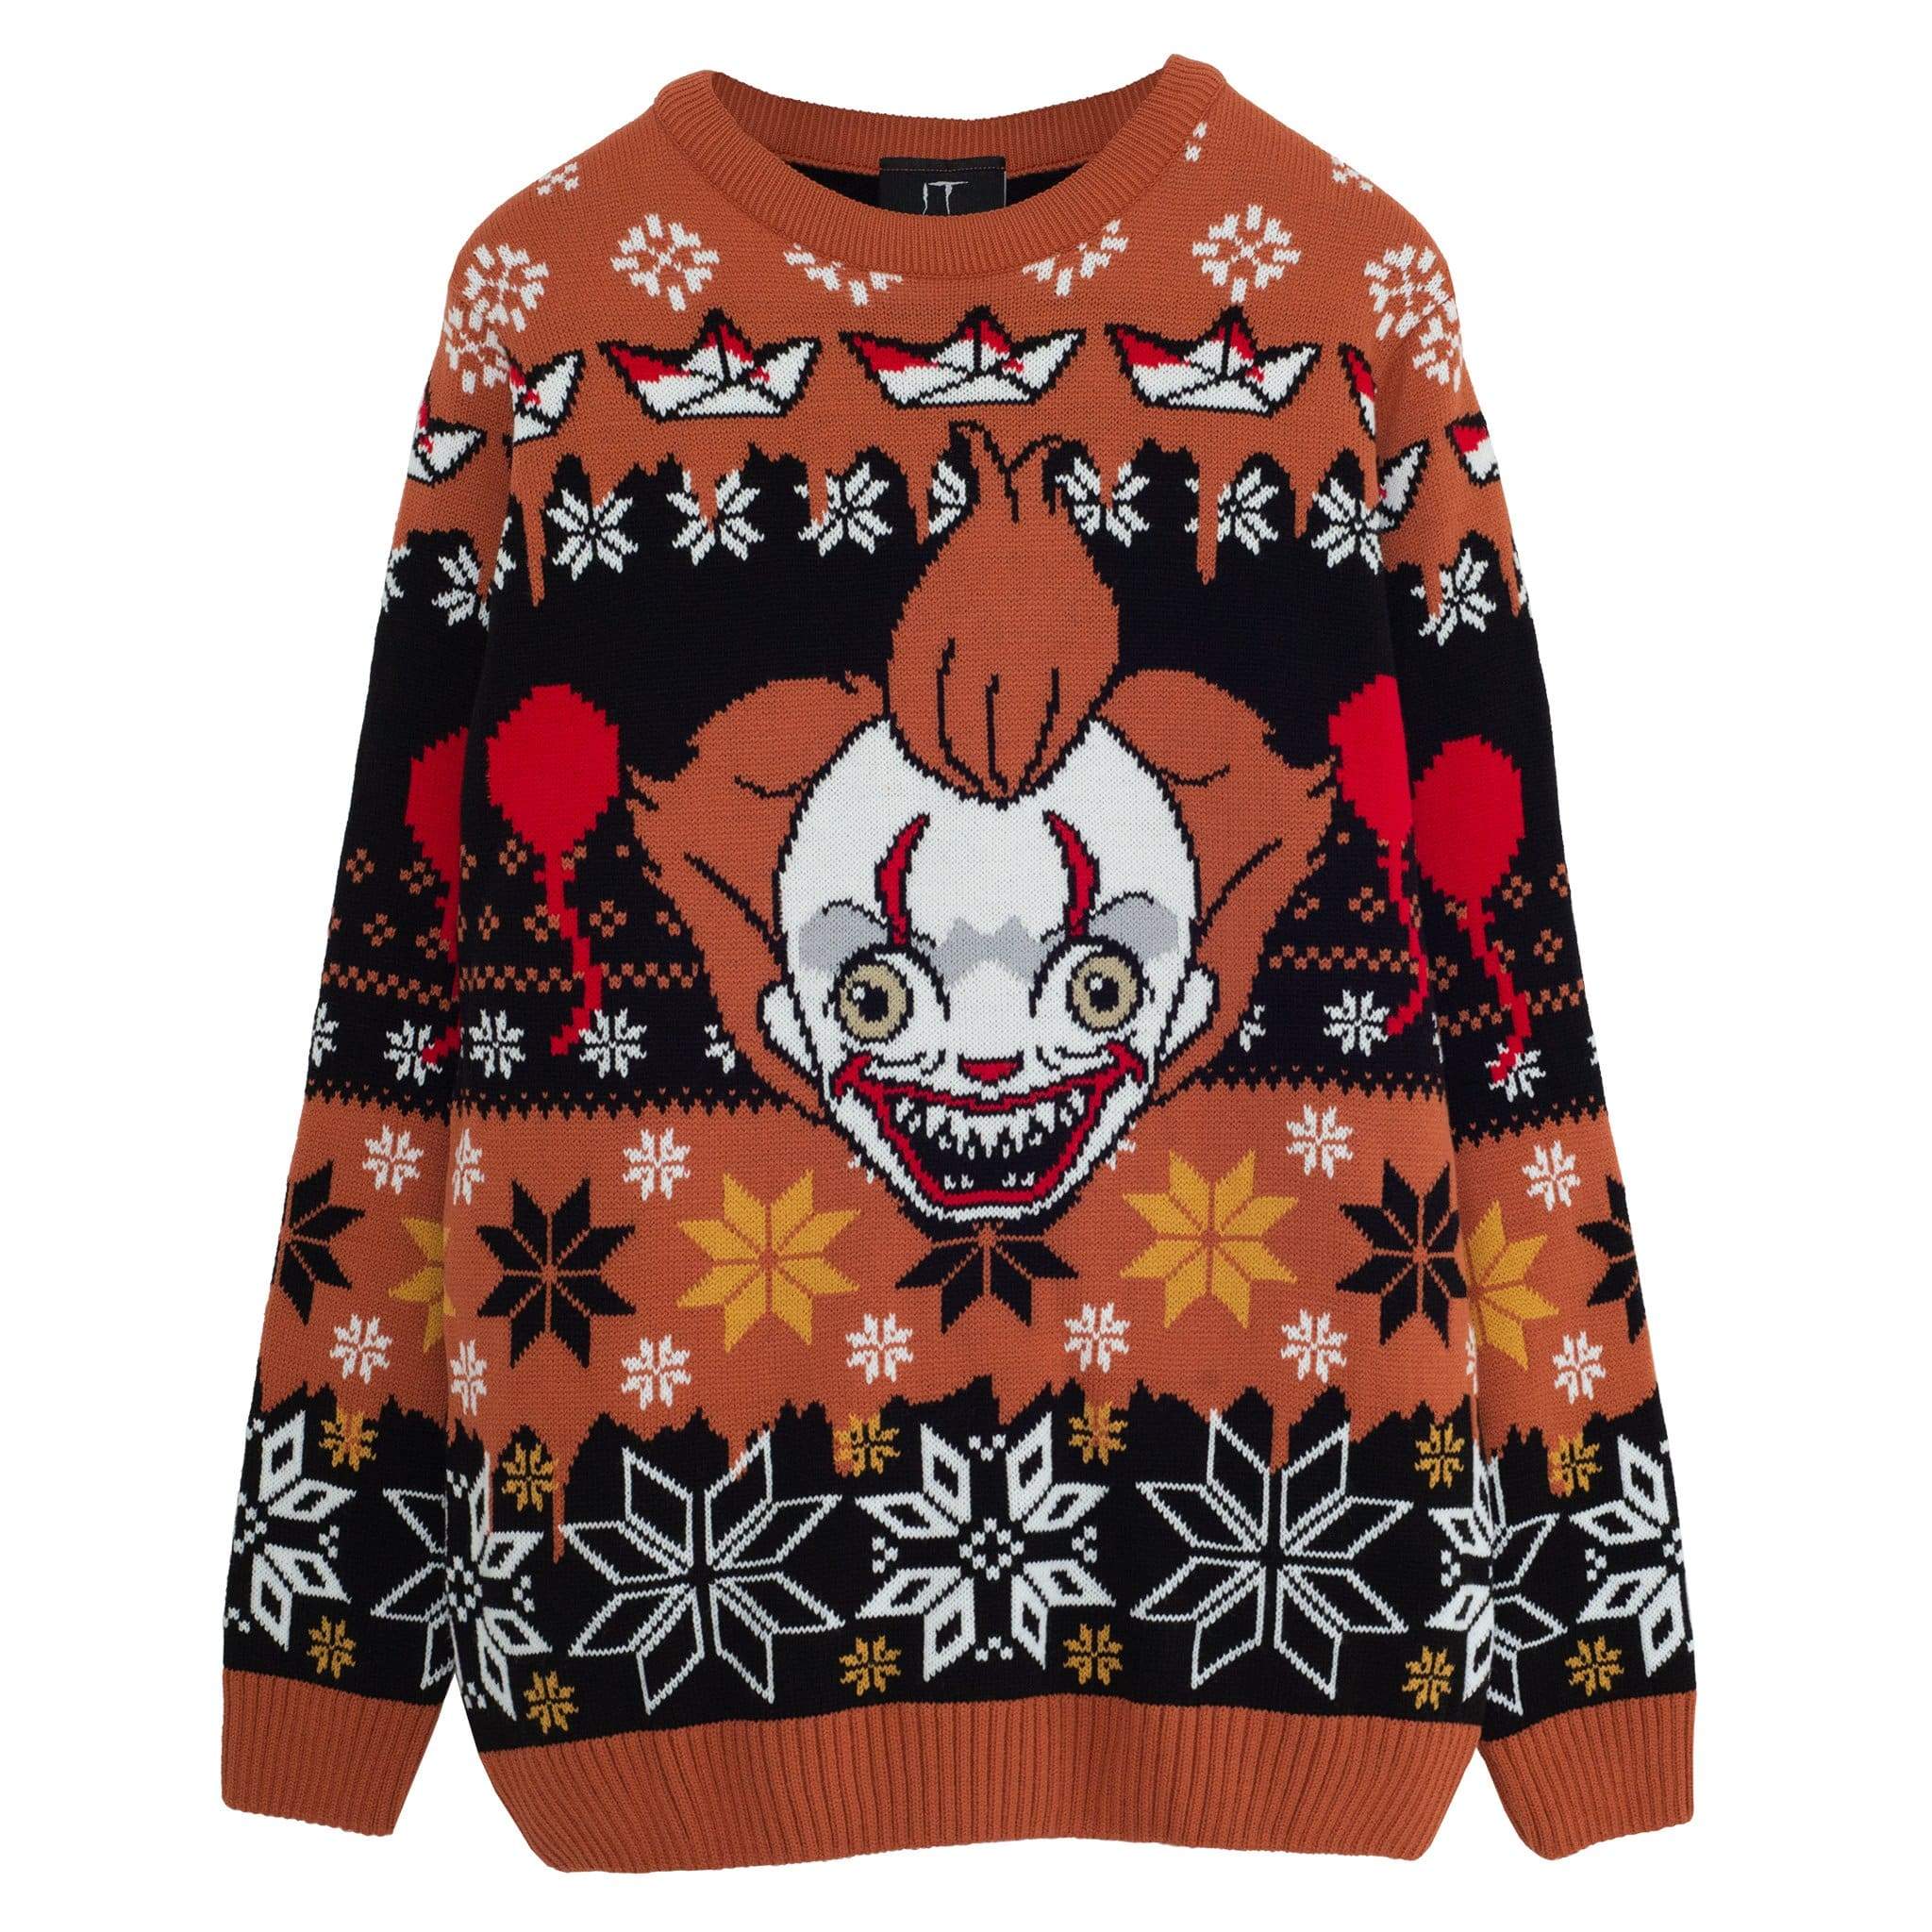 Pennywise knitted jumper